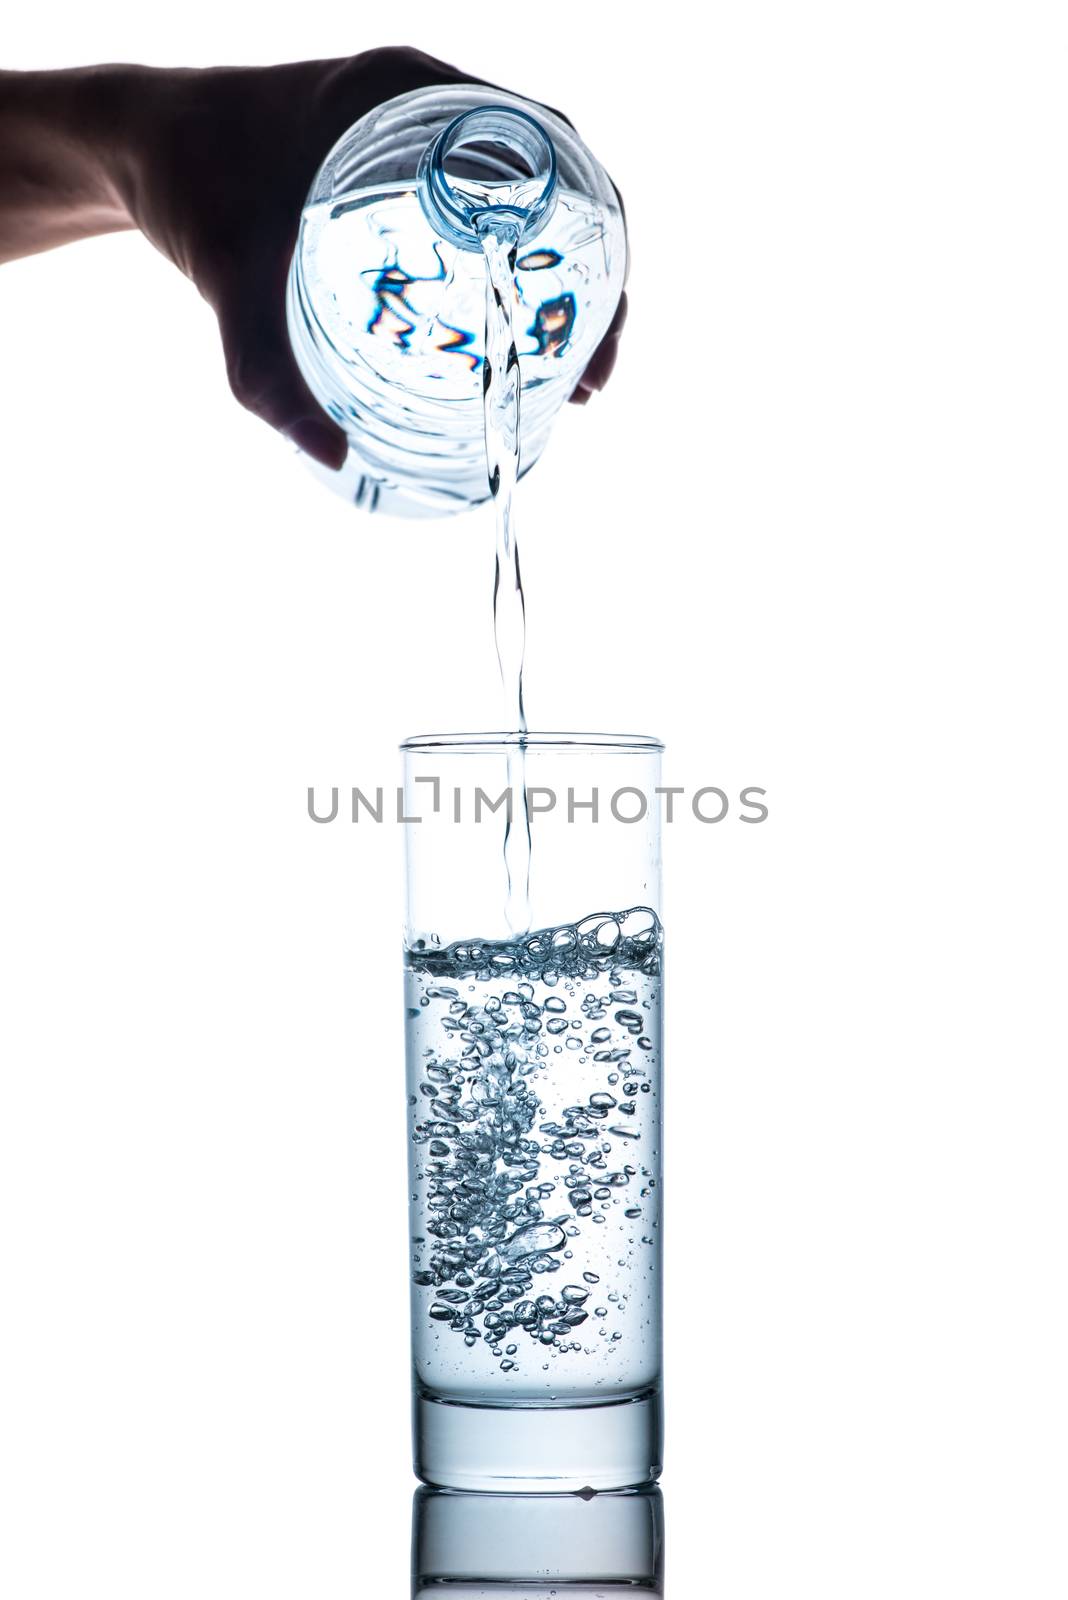 Drinking water is poured into a glass from bottle by makidotvn